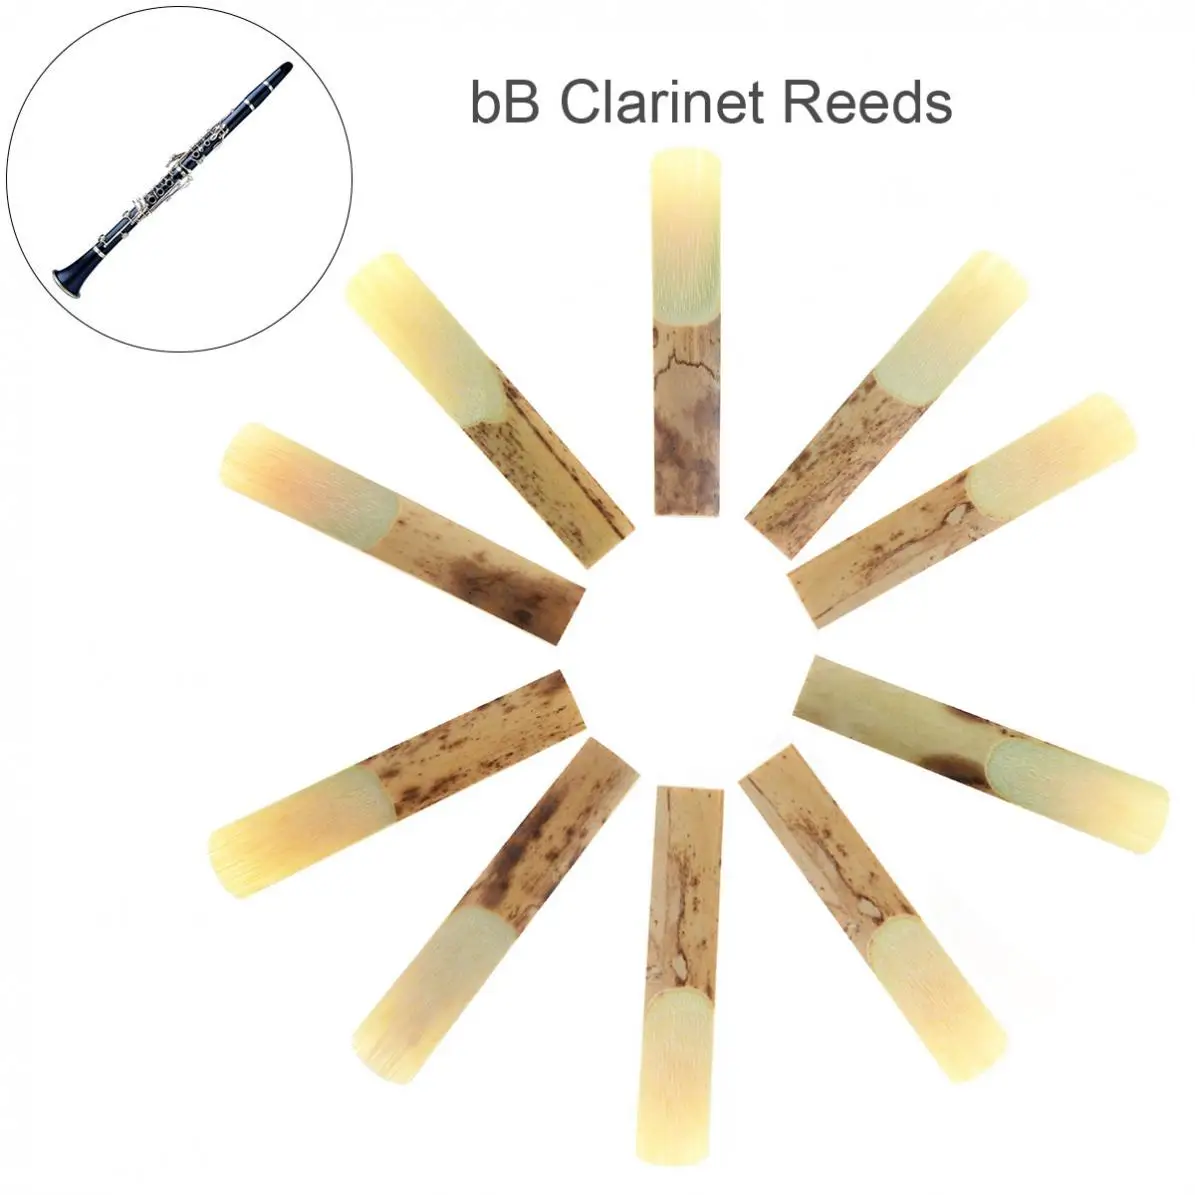 

10pcs Professional bB Clarinet Reeds Strength 2.5 for Clarinet Mouthpiece Parts Traditional Bamboo Reed Woodwind Instruments